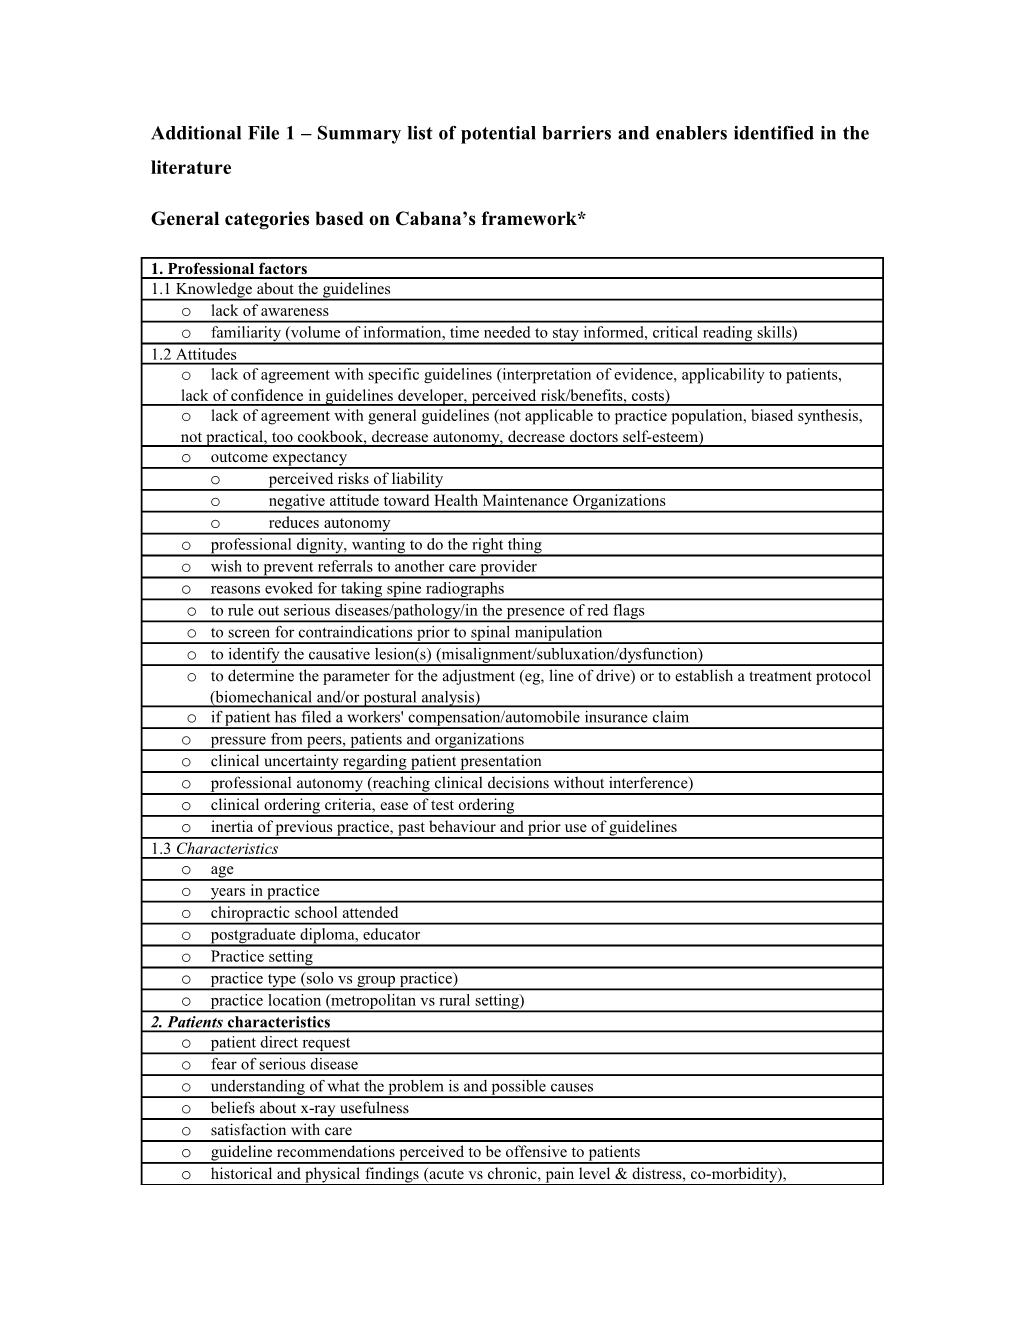 Additional File 1 Summary List of Potential Barriers and Enablers Identified in the Literature